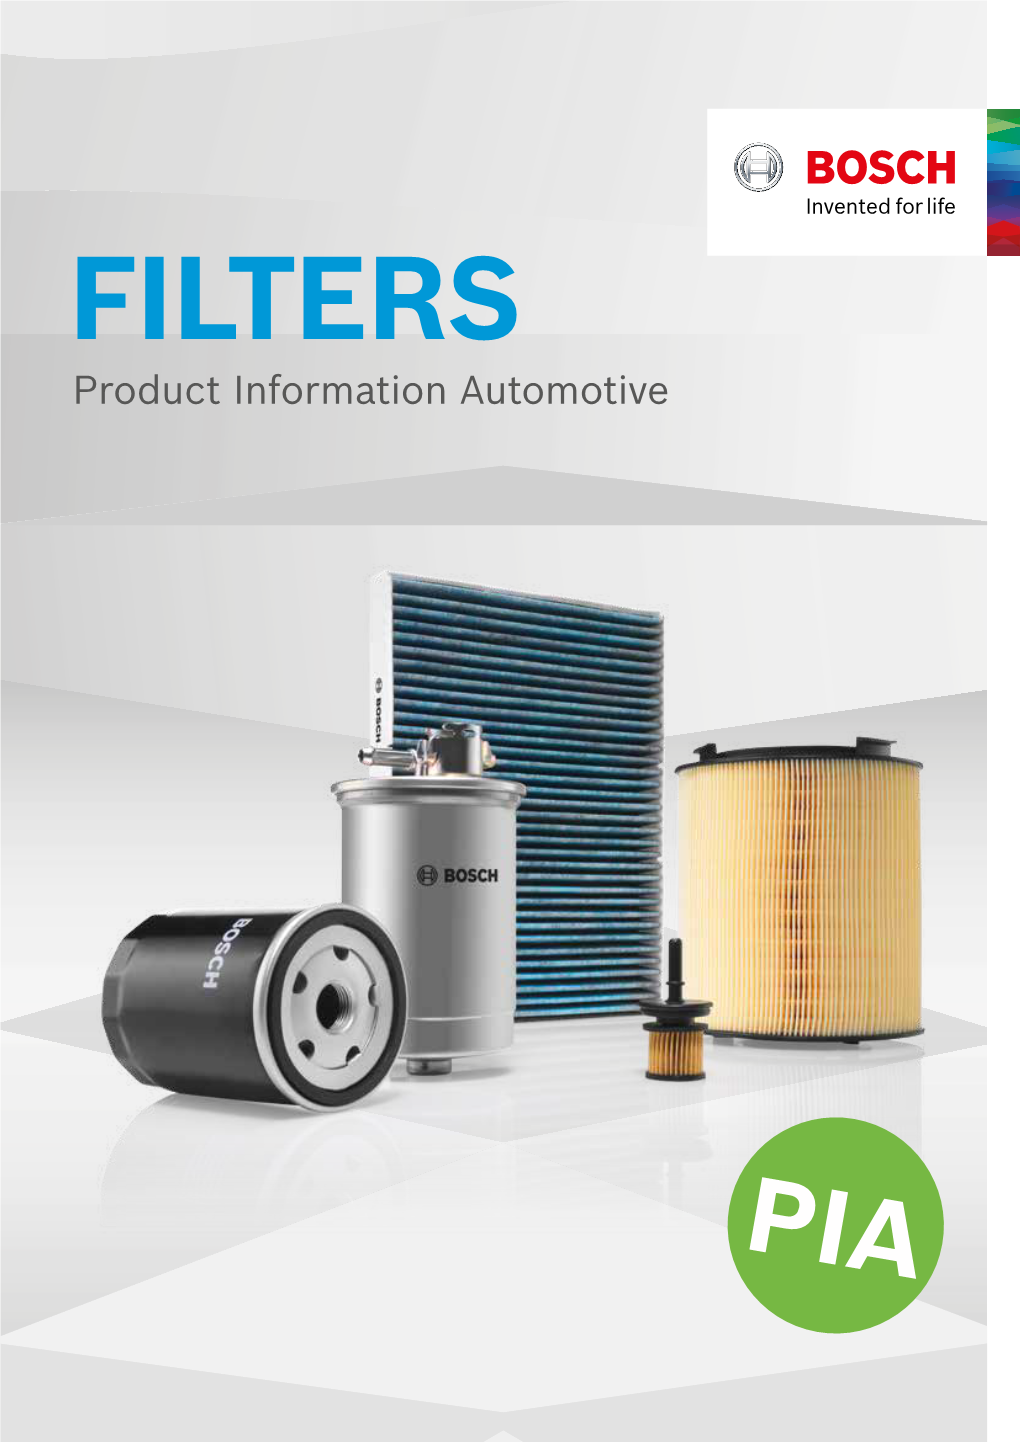 FILTERS Product Information Automotive